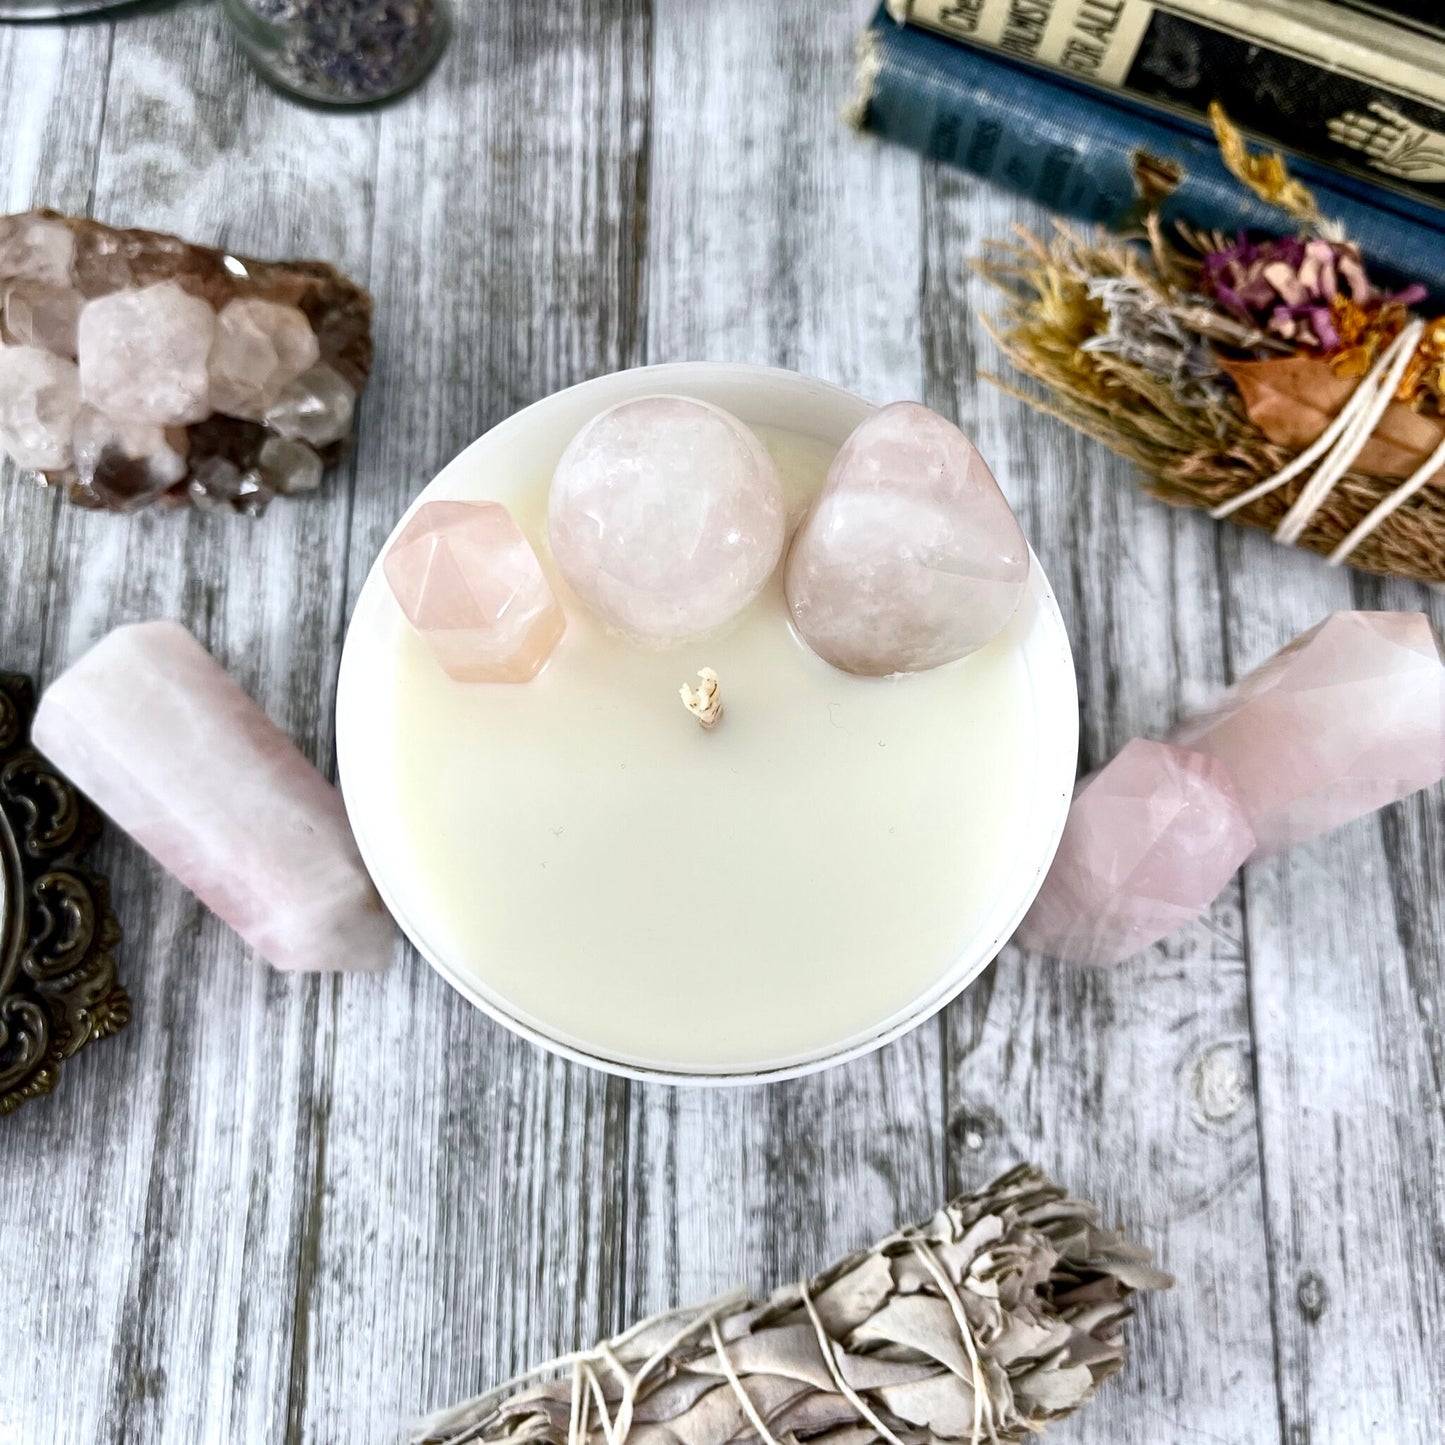 Rose Petals Candle with Rose Quartz - Moss & Moon Apothecary Crystal Infused Luxury Soy Candle